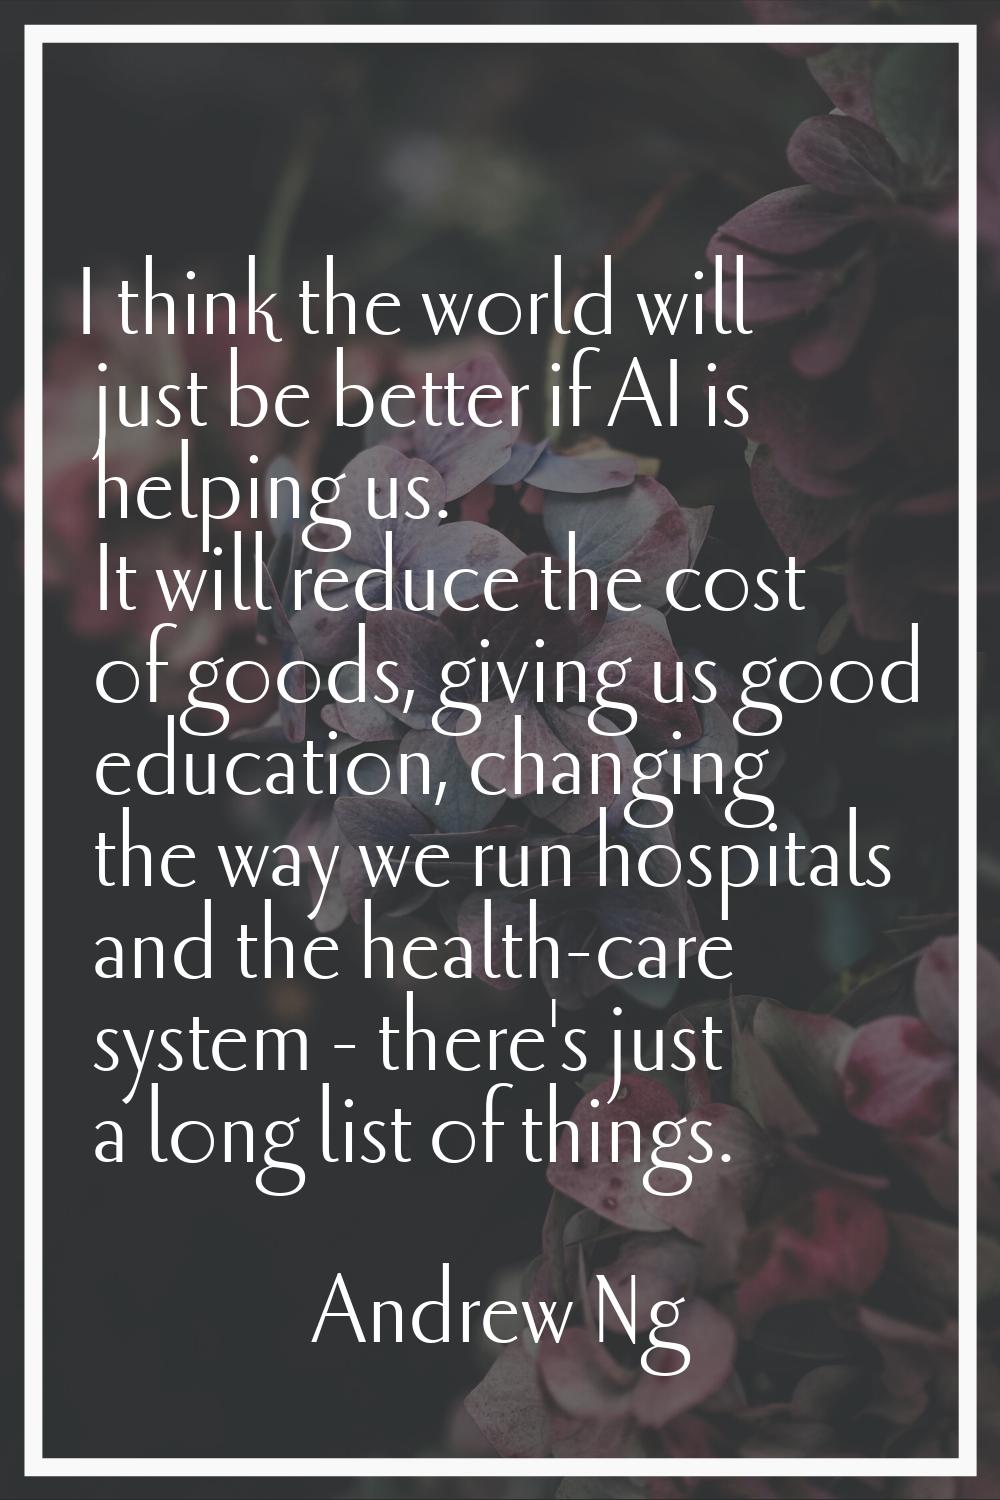 I think the world will just be better if AI is helping us. It will reduce the cost of goods, giving